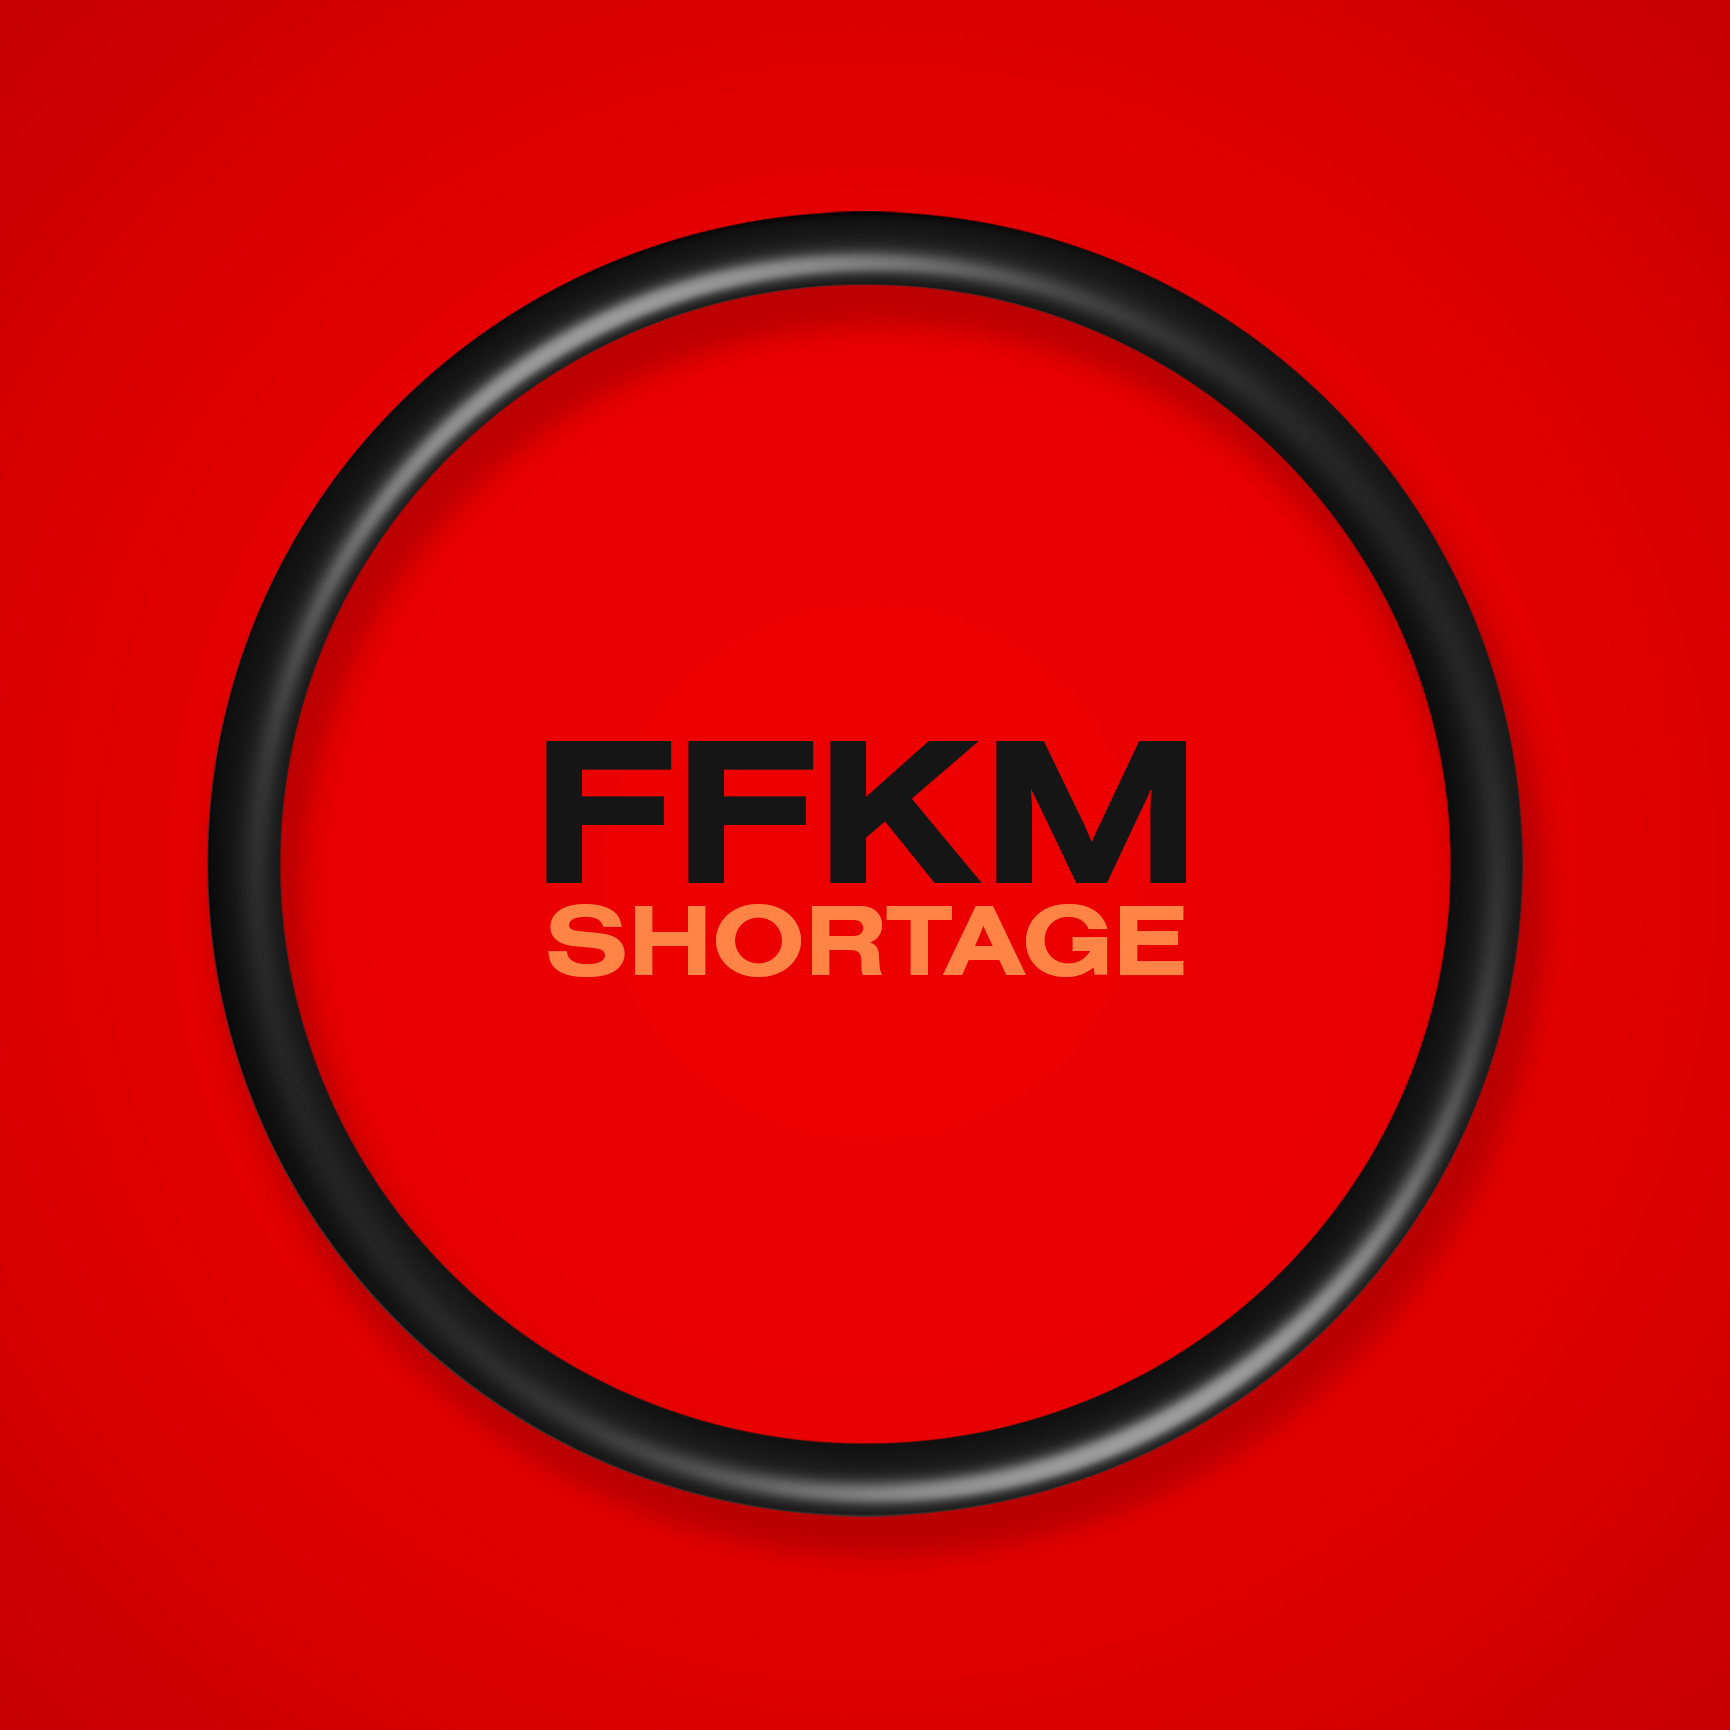 Why Is There an FFKM Shortage?